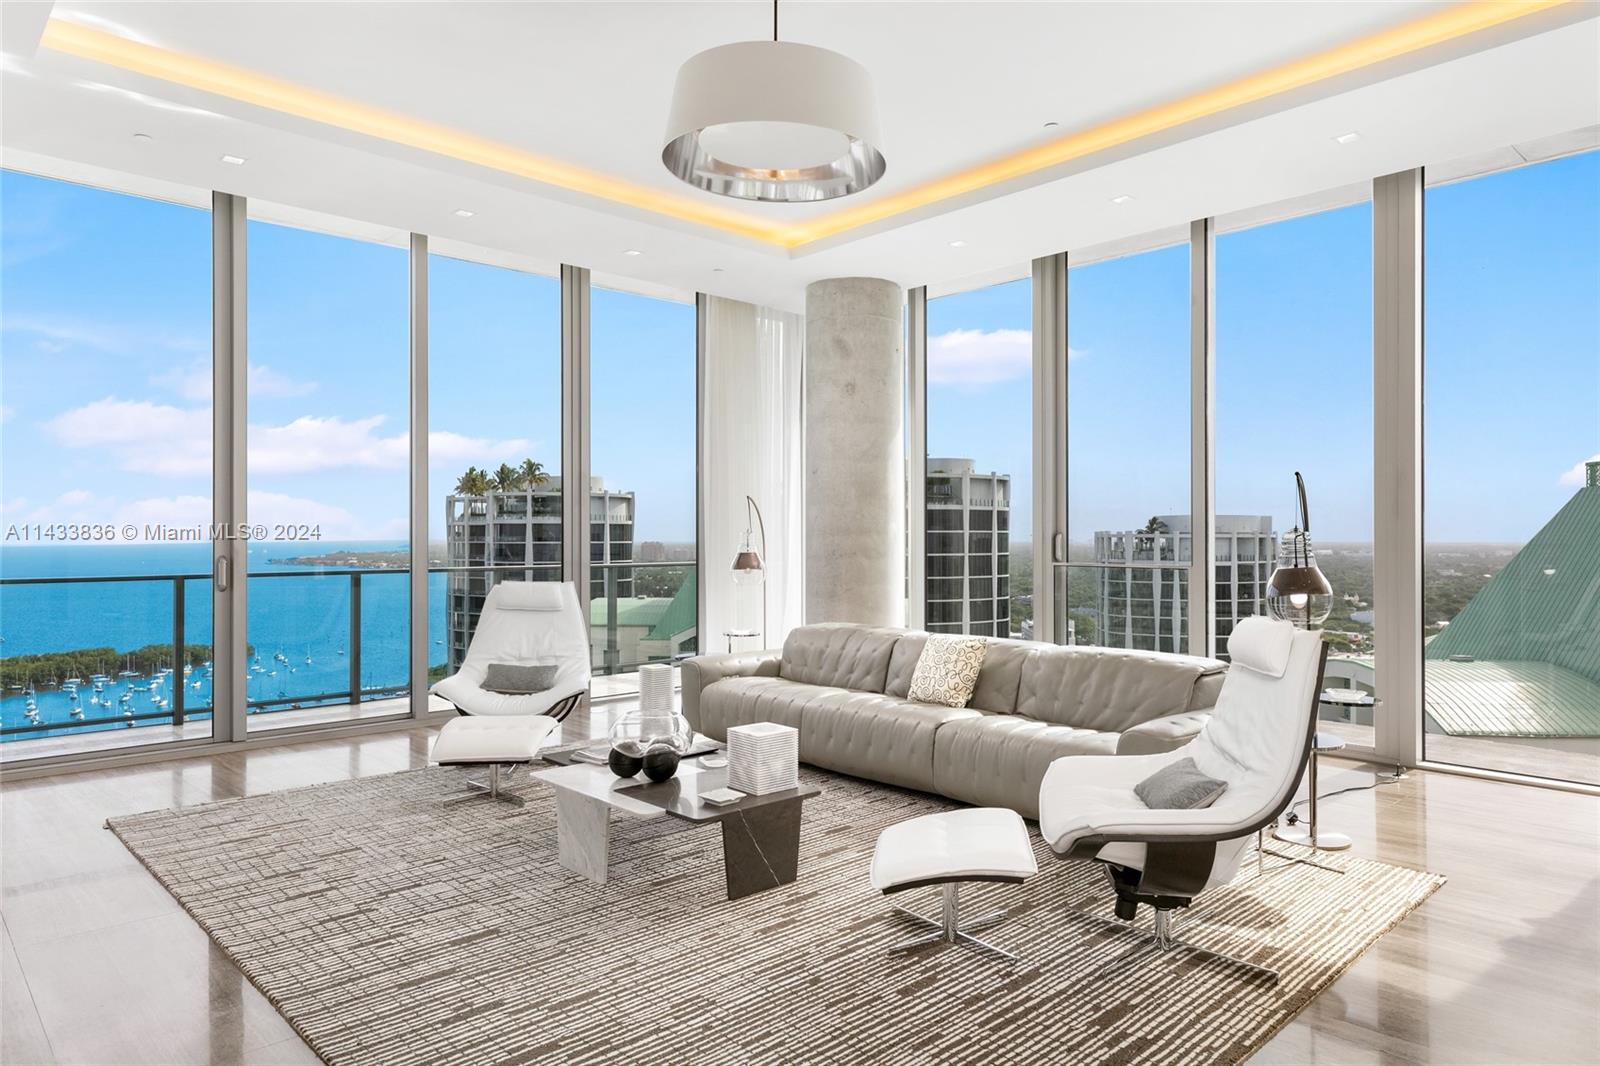 Discover Miami's grandest single-floor condo in Miami, spanning 11,000 sq. ft with 12' ceilings. This penthouse, designed by Nick Luaces, showcases 6 beds, 6 baths, 2 powder rooms, a theater, library, office, and distinct seating zones. Boasting Bang & Olufsen home automation, the 3,000 sq. ft master suite stuns with a chic dressing area, midnight kitchen, gym, sauna, and terraces accessible from public spaces. Move-in ready and fully furnished with remarkable artwork, this home includes access to a 4-car private garage with storage. Enjoy bay views from the unique wrap-around terrace, private elevator foyer, and deluxe kitchen.  This masterpiece resides in Grove at Grand Bay by architect Bjarke Engels. Experience an unparalleled lifestyle living in the heart of the Grove!